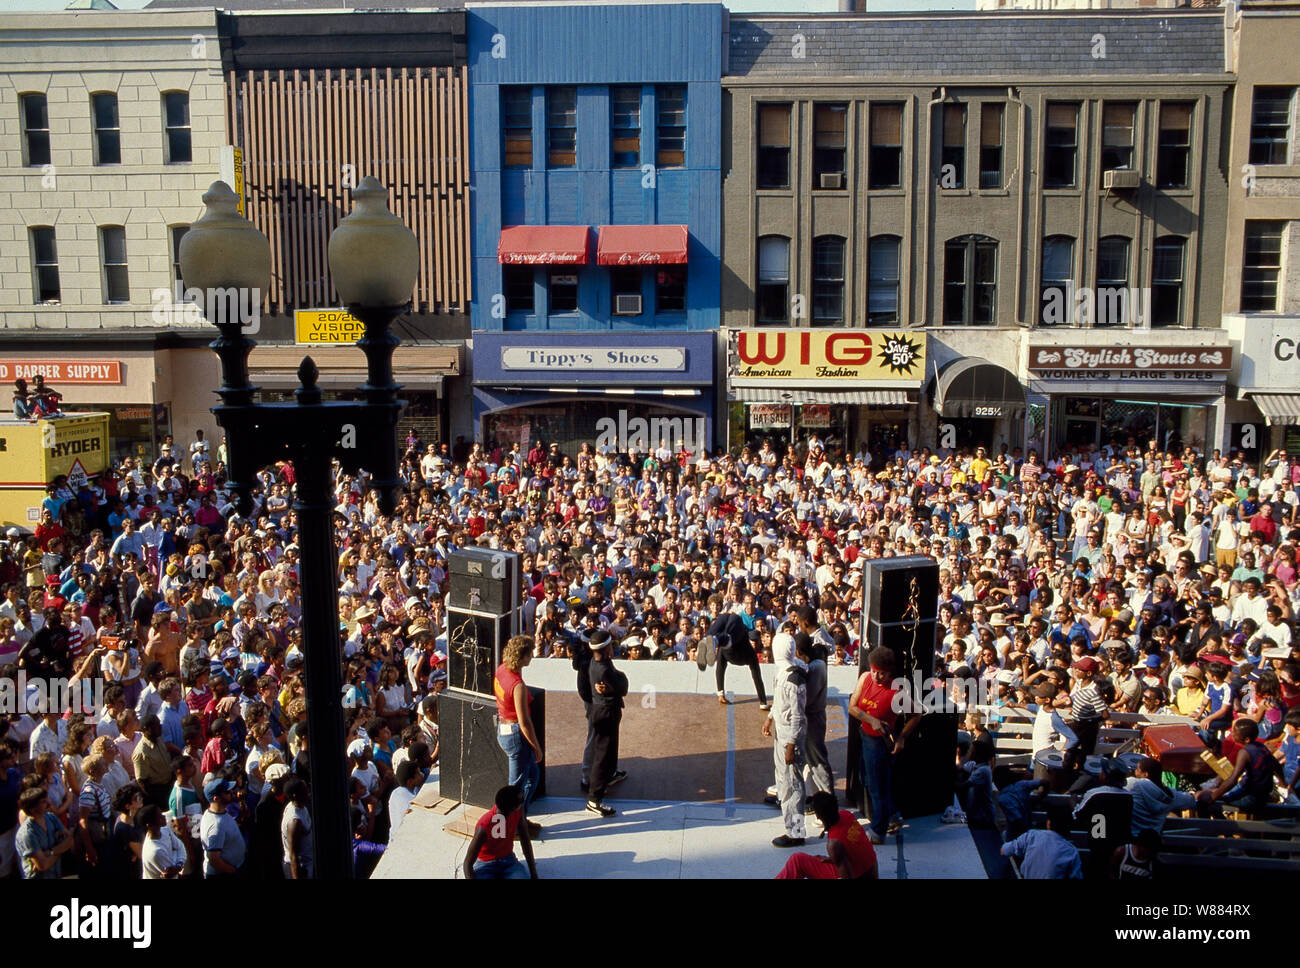 A crowd gathers to watch performers on H Street, NW, Washington, D.C Stock Photo